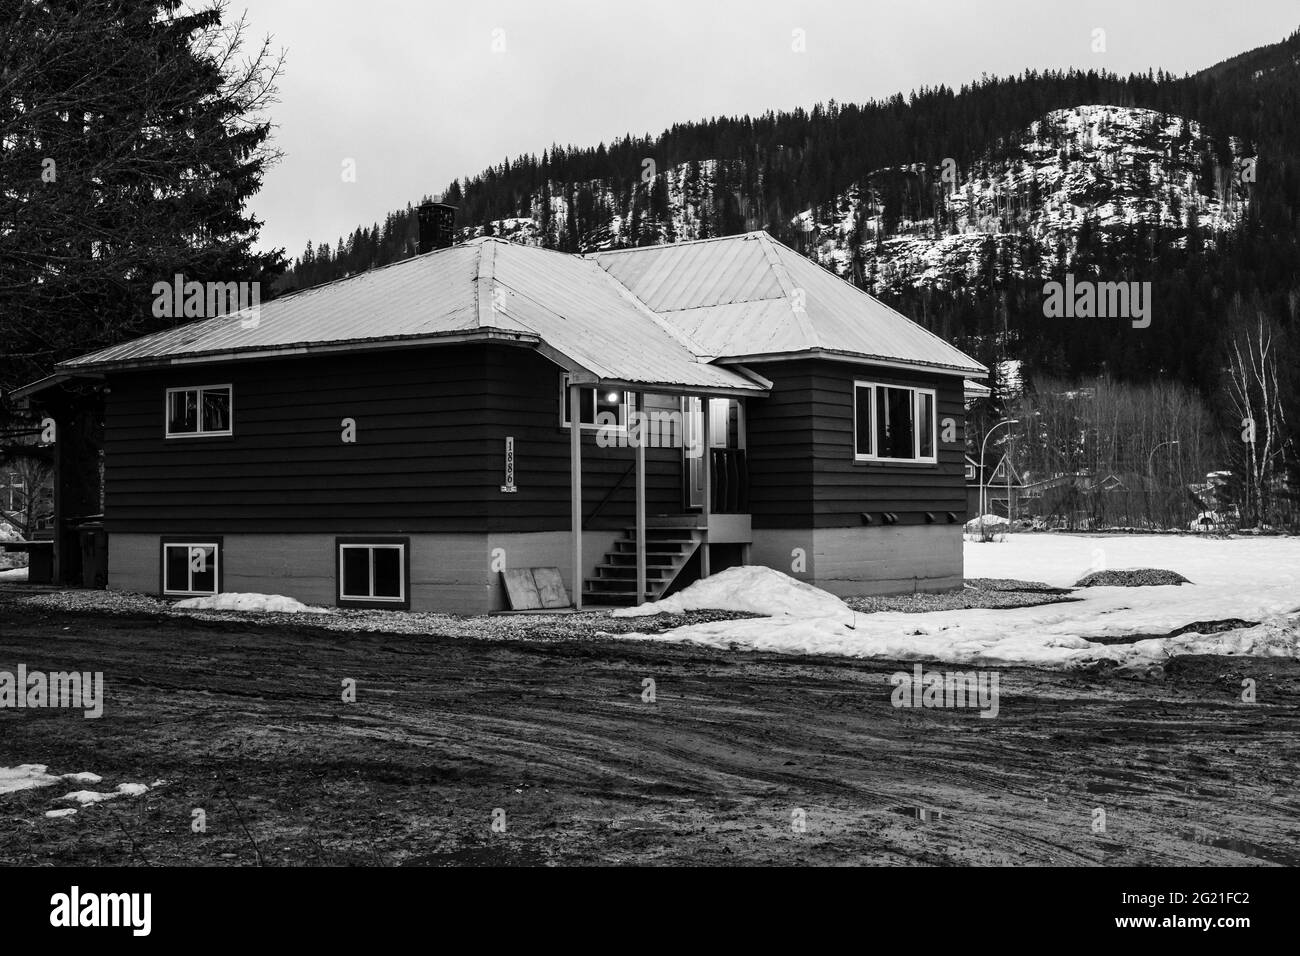 REVELSTOKE, CANADA - MARCH 14, 2021: black and white private home in small town evening time early spring with snow Stock Photo